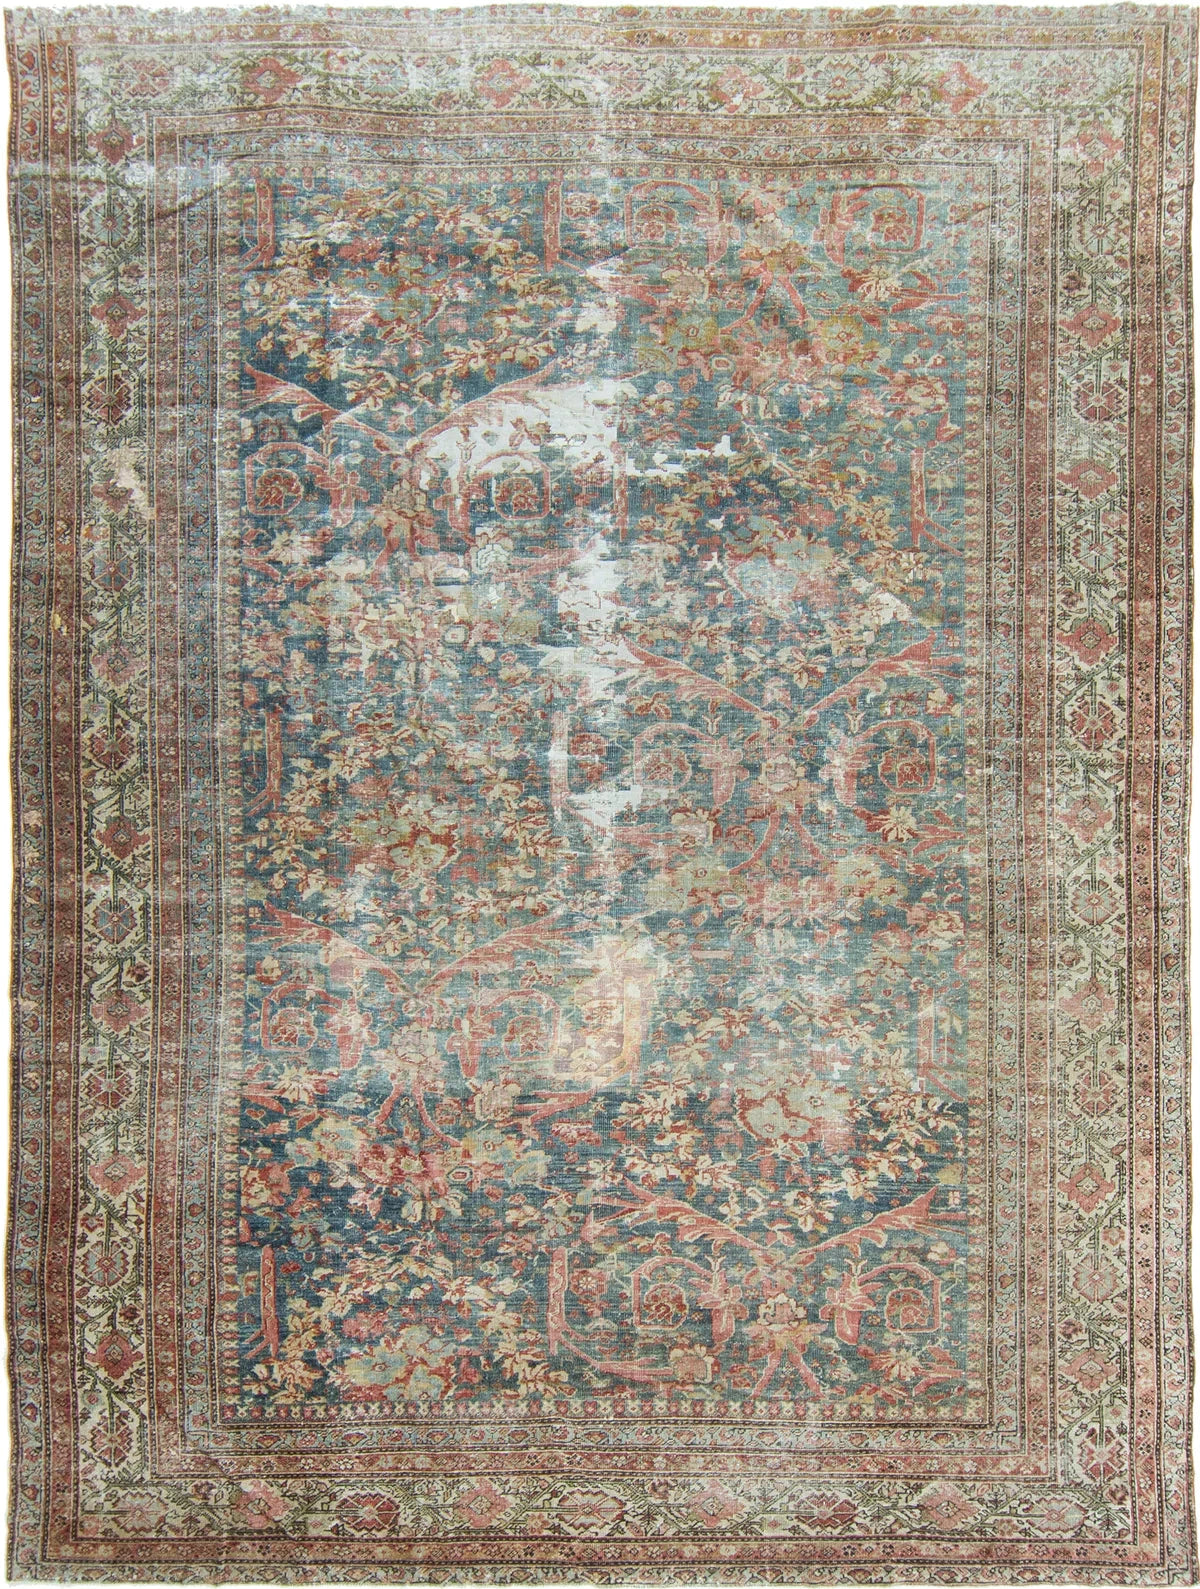 Antique Persian Distressed Rug Sultanabad 